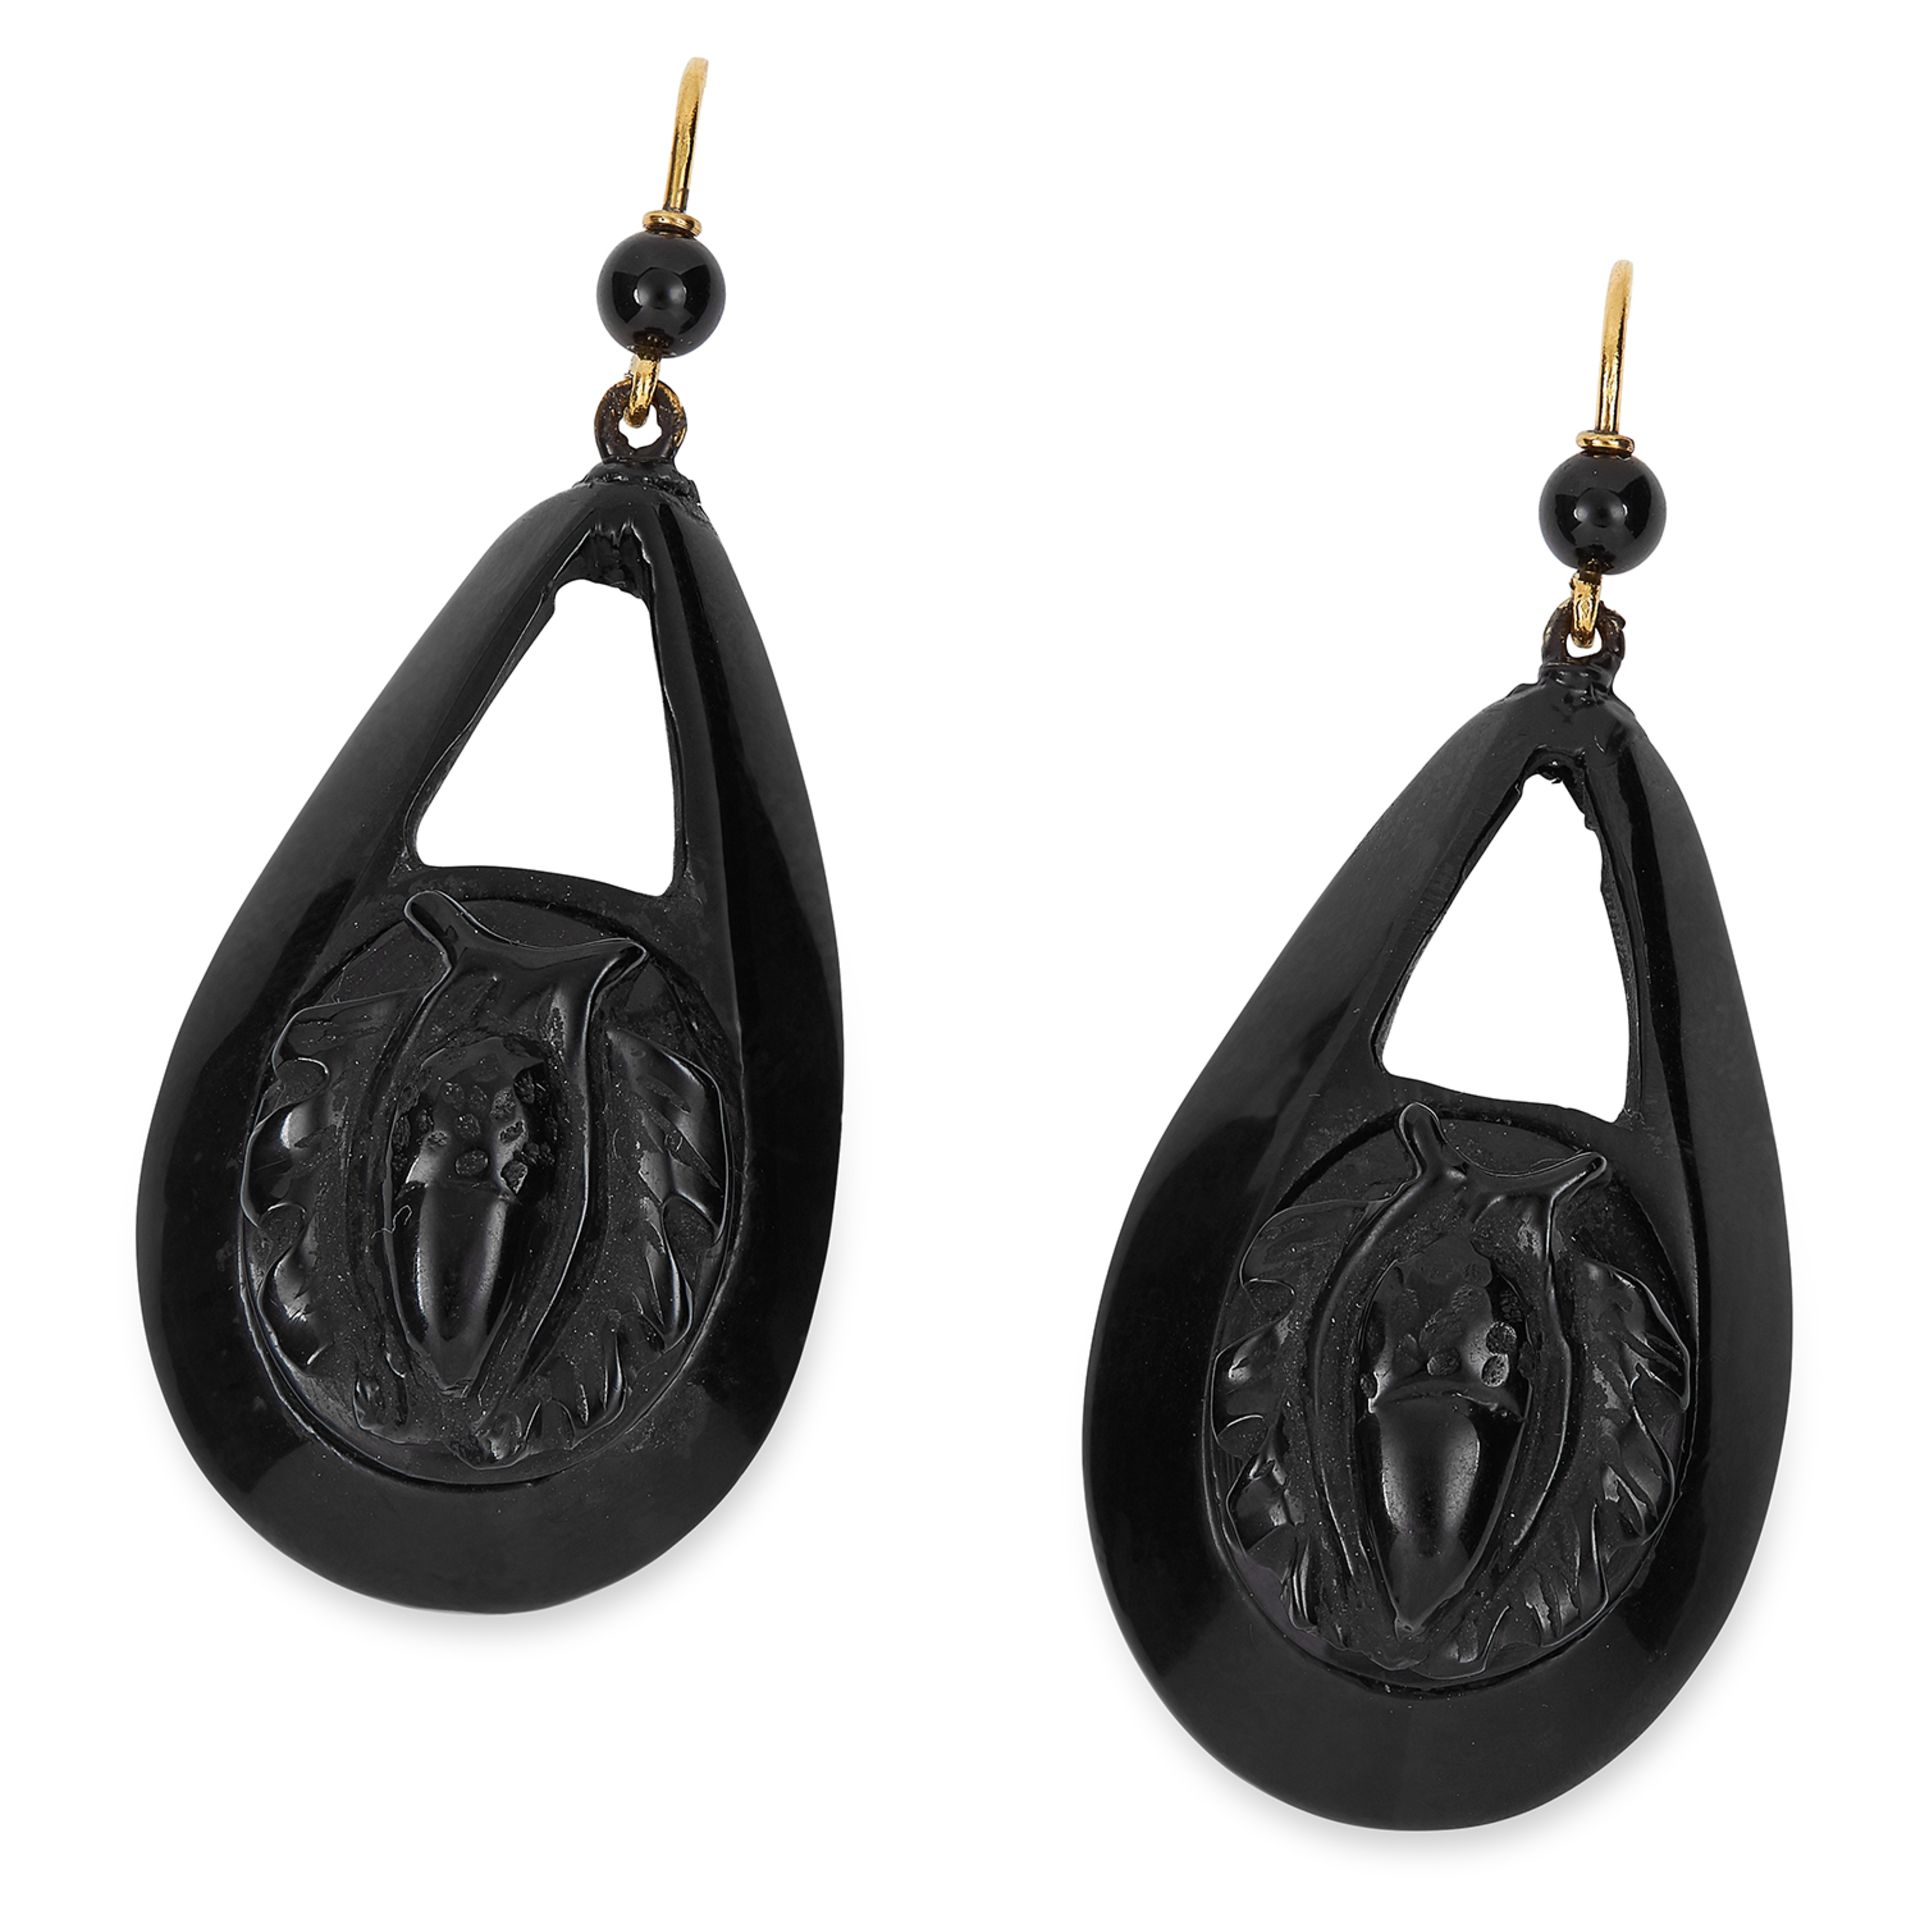 ANTIQUE WHITBY JET EARRINGS, 19TH CENTURY carved to depict insects to the front, 5.1cm, 7.3g.